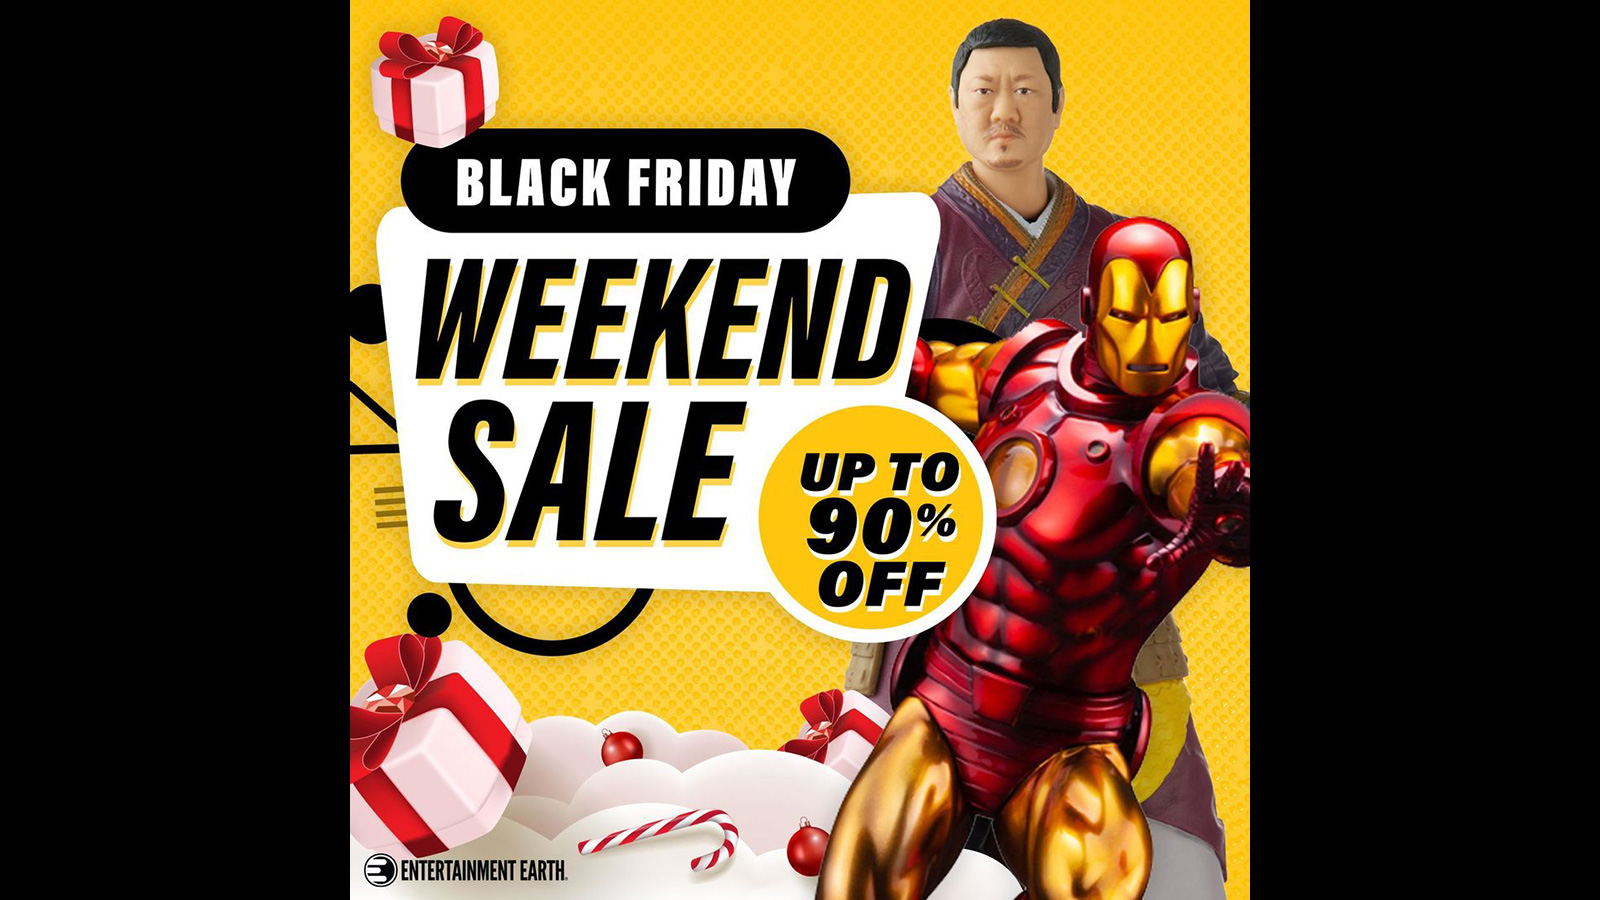 New Black Friday Weekend Sale At Entertainment Earth - Save A Extra 10% With Our Exclusive Link